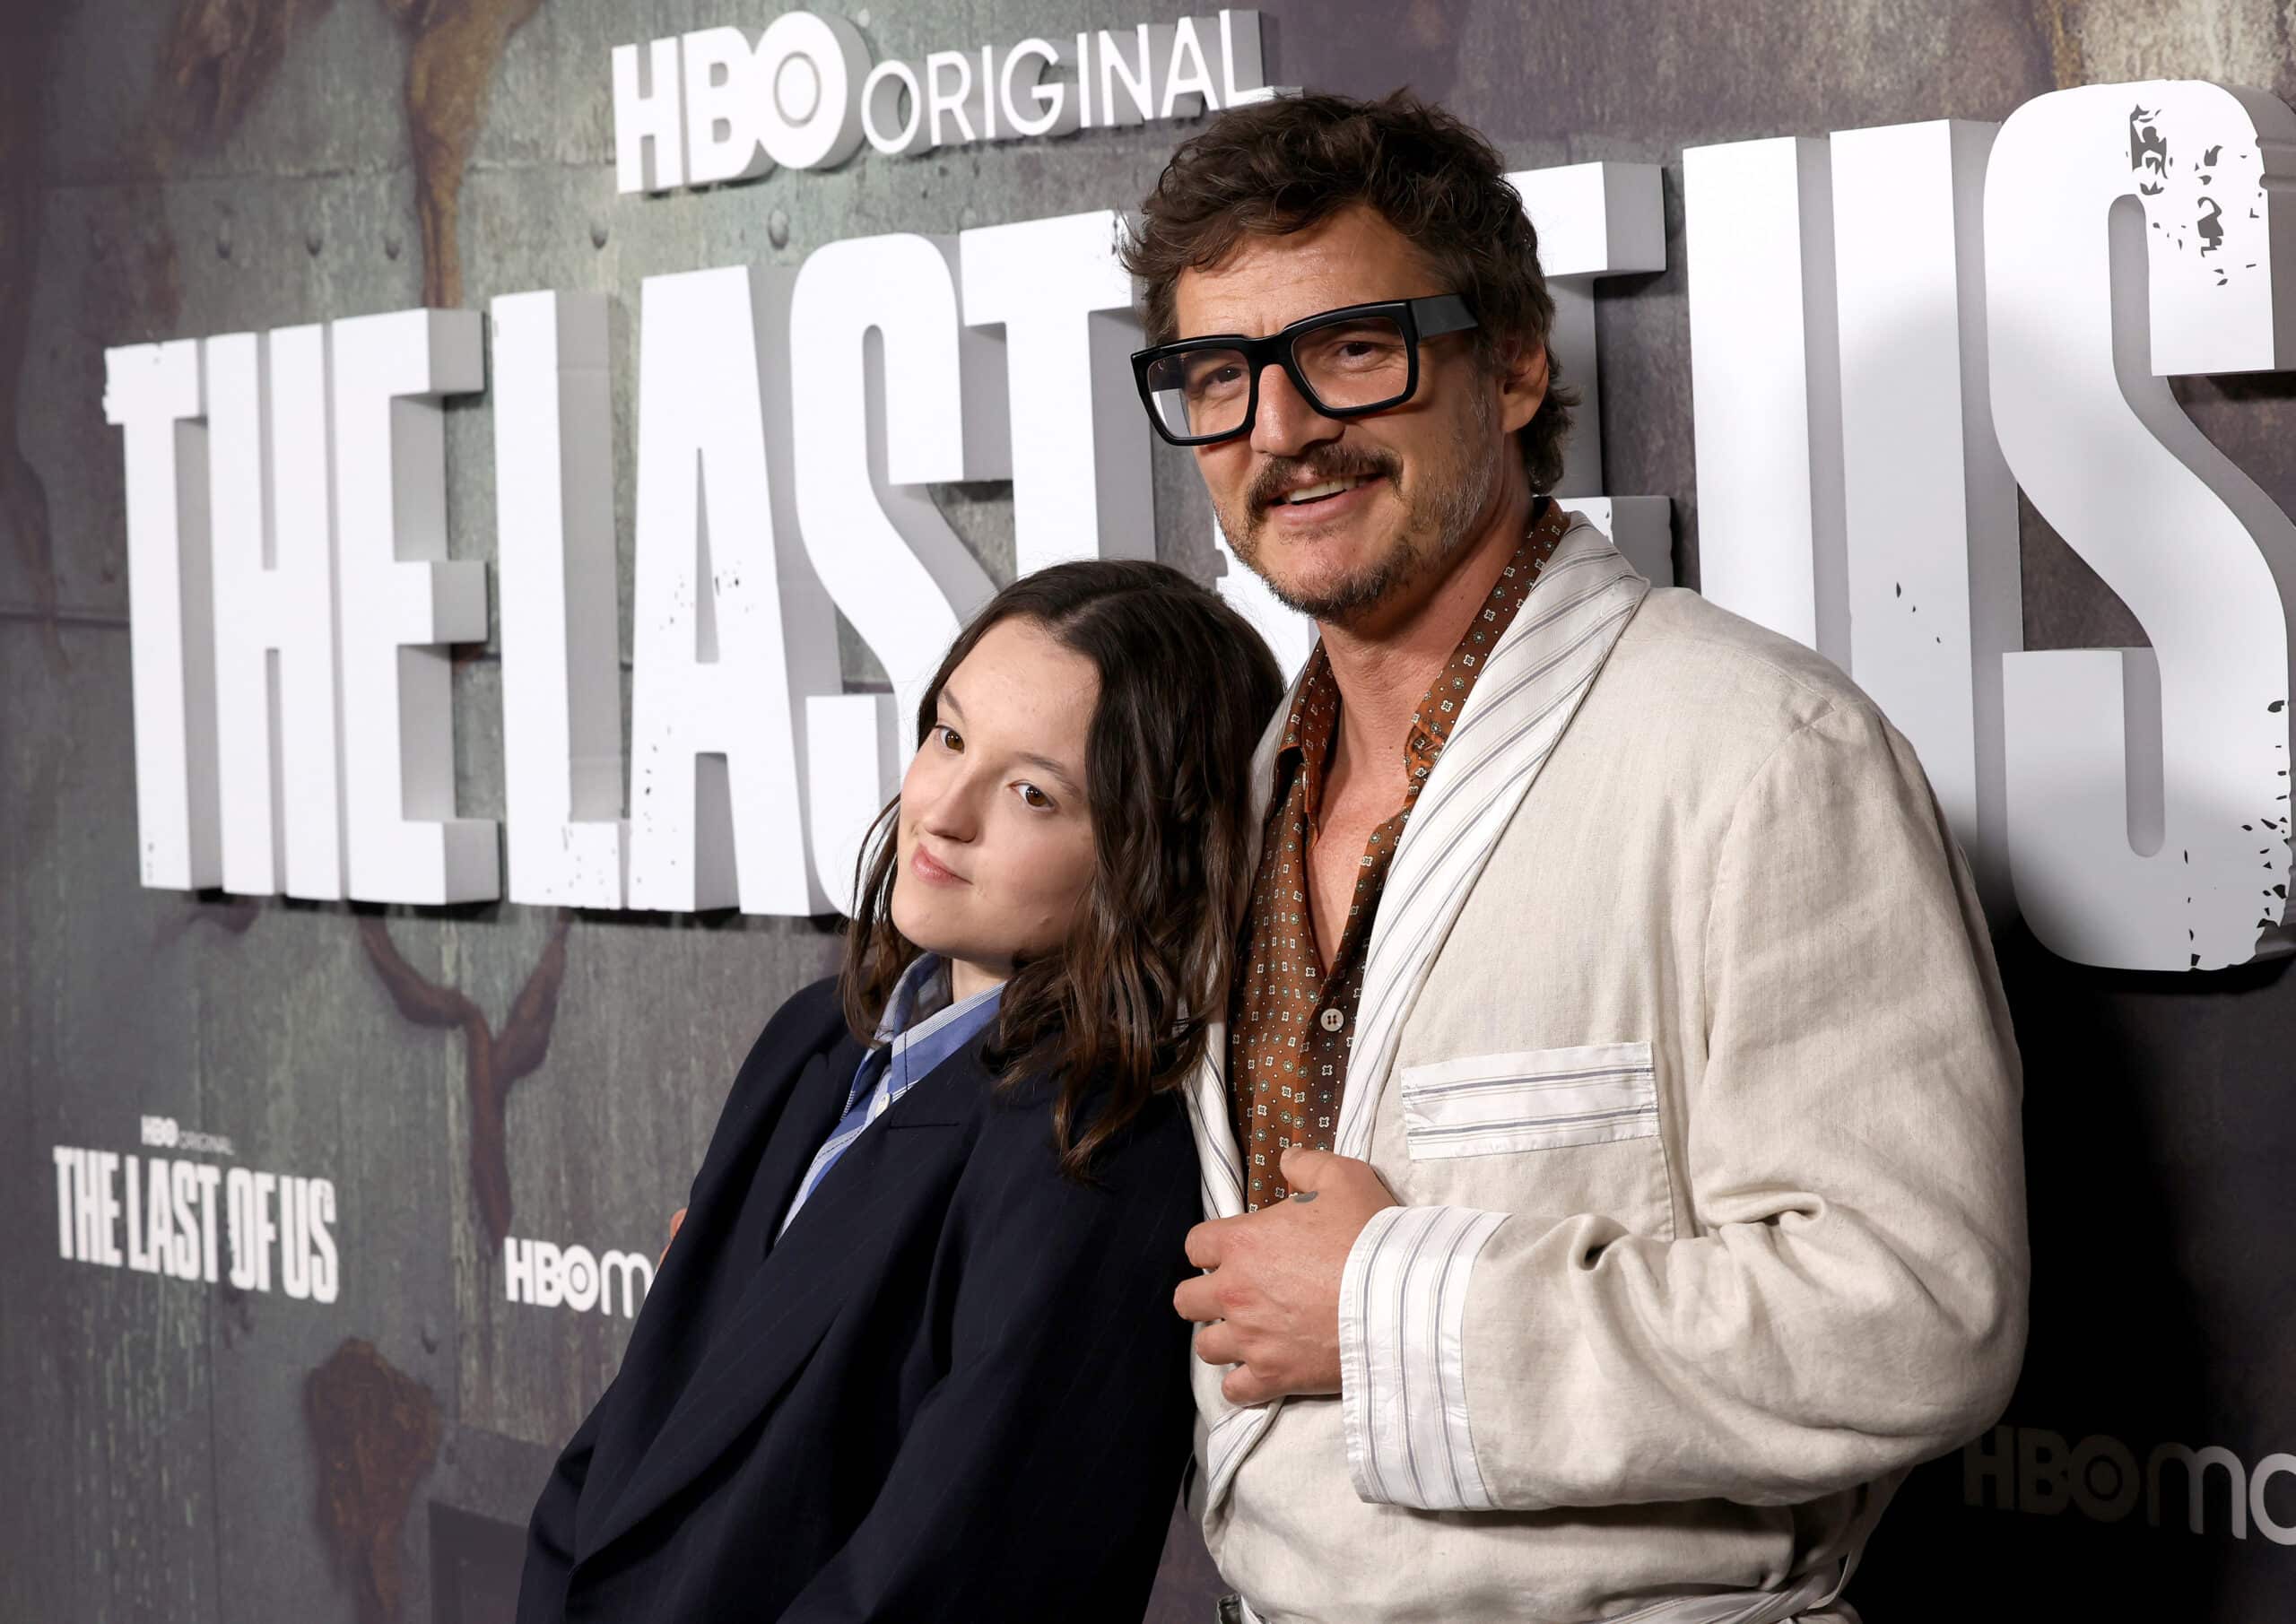 LOS ANGELES, CALIFORNIA - APRIL 28: Bella Ramsey and Pedro Pascal attend the Los Angeles FYC Event for HBO Original Series' "The Last Of Us" at the Directors Guild Of America on April 28, 2023 in Los Angeles, California. (Photo by FilmMagic